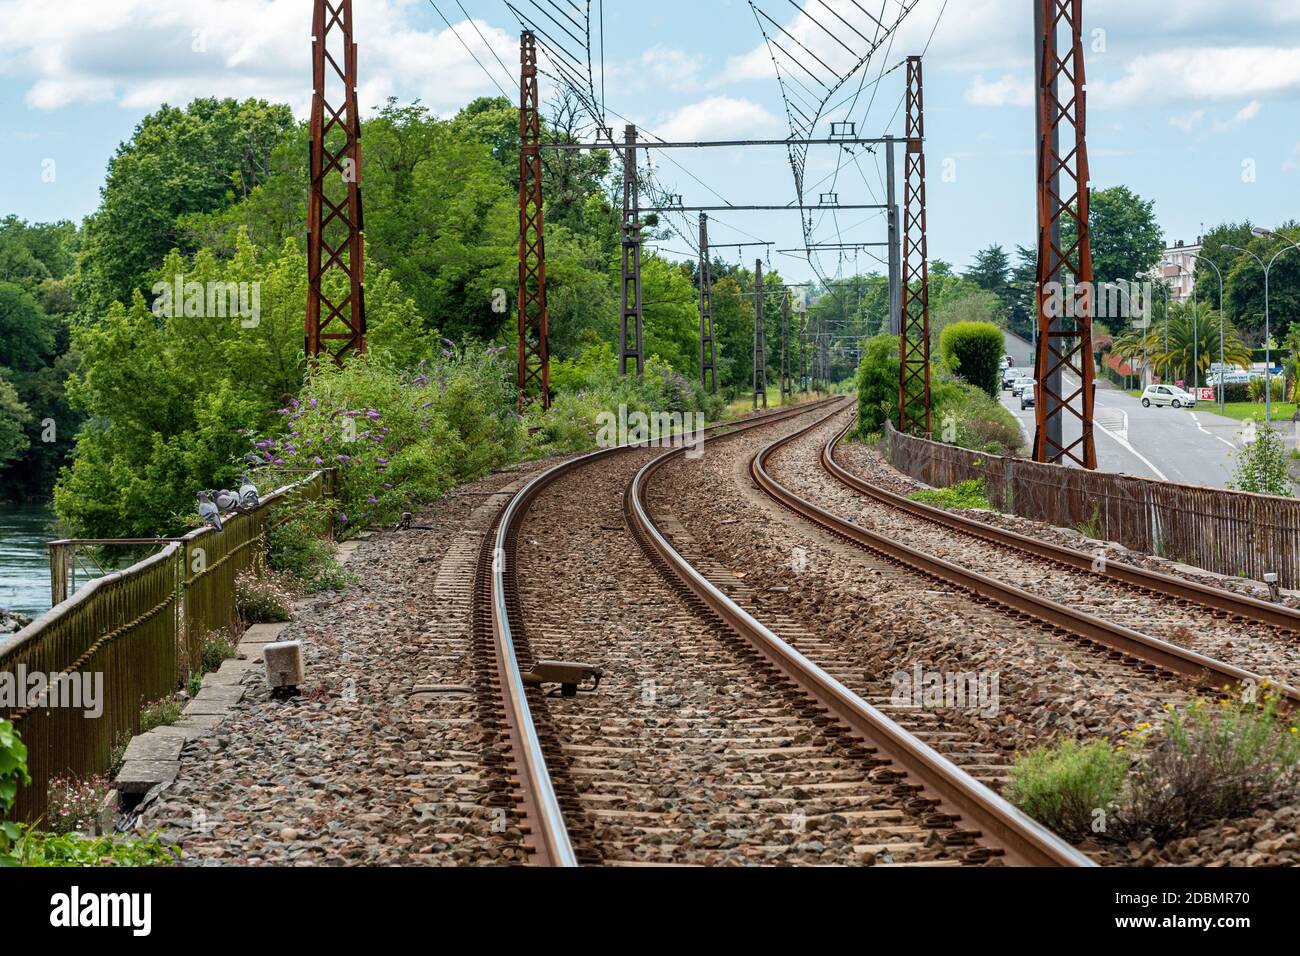 view of railway in the french countryside Stock Photo